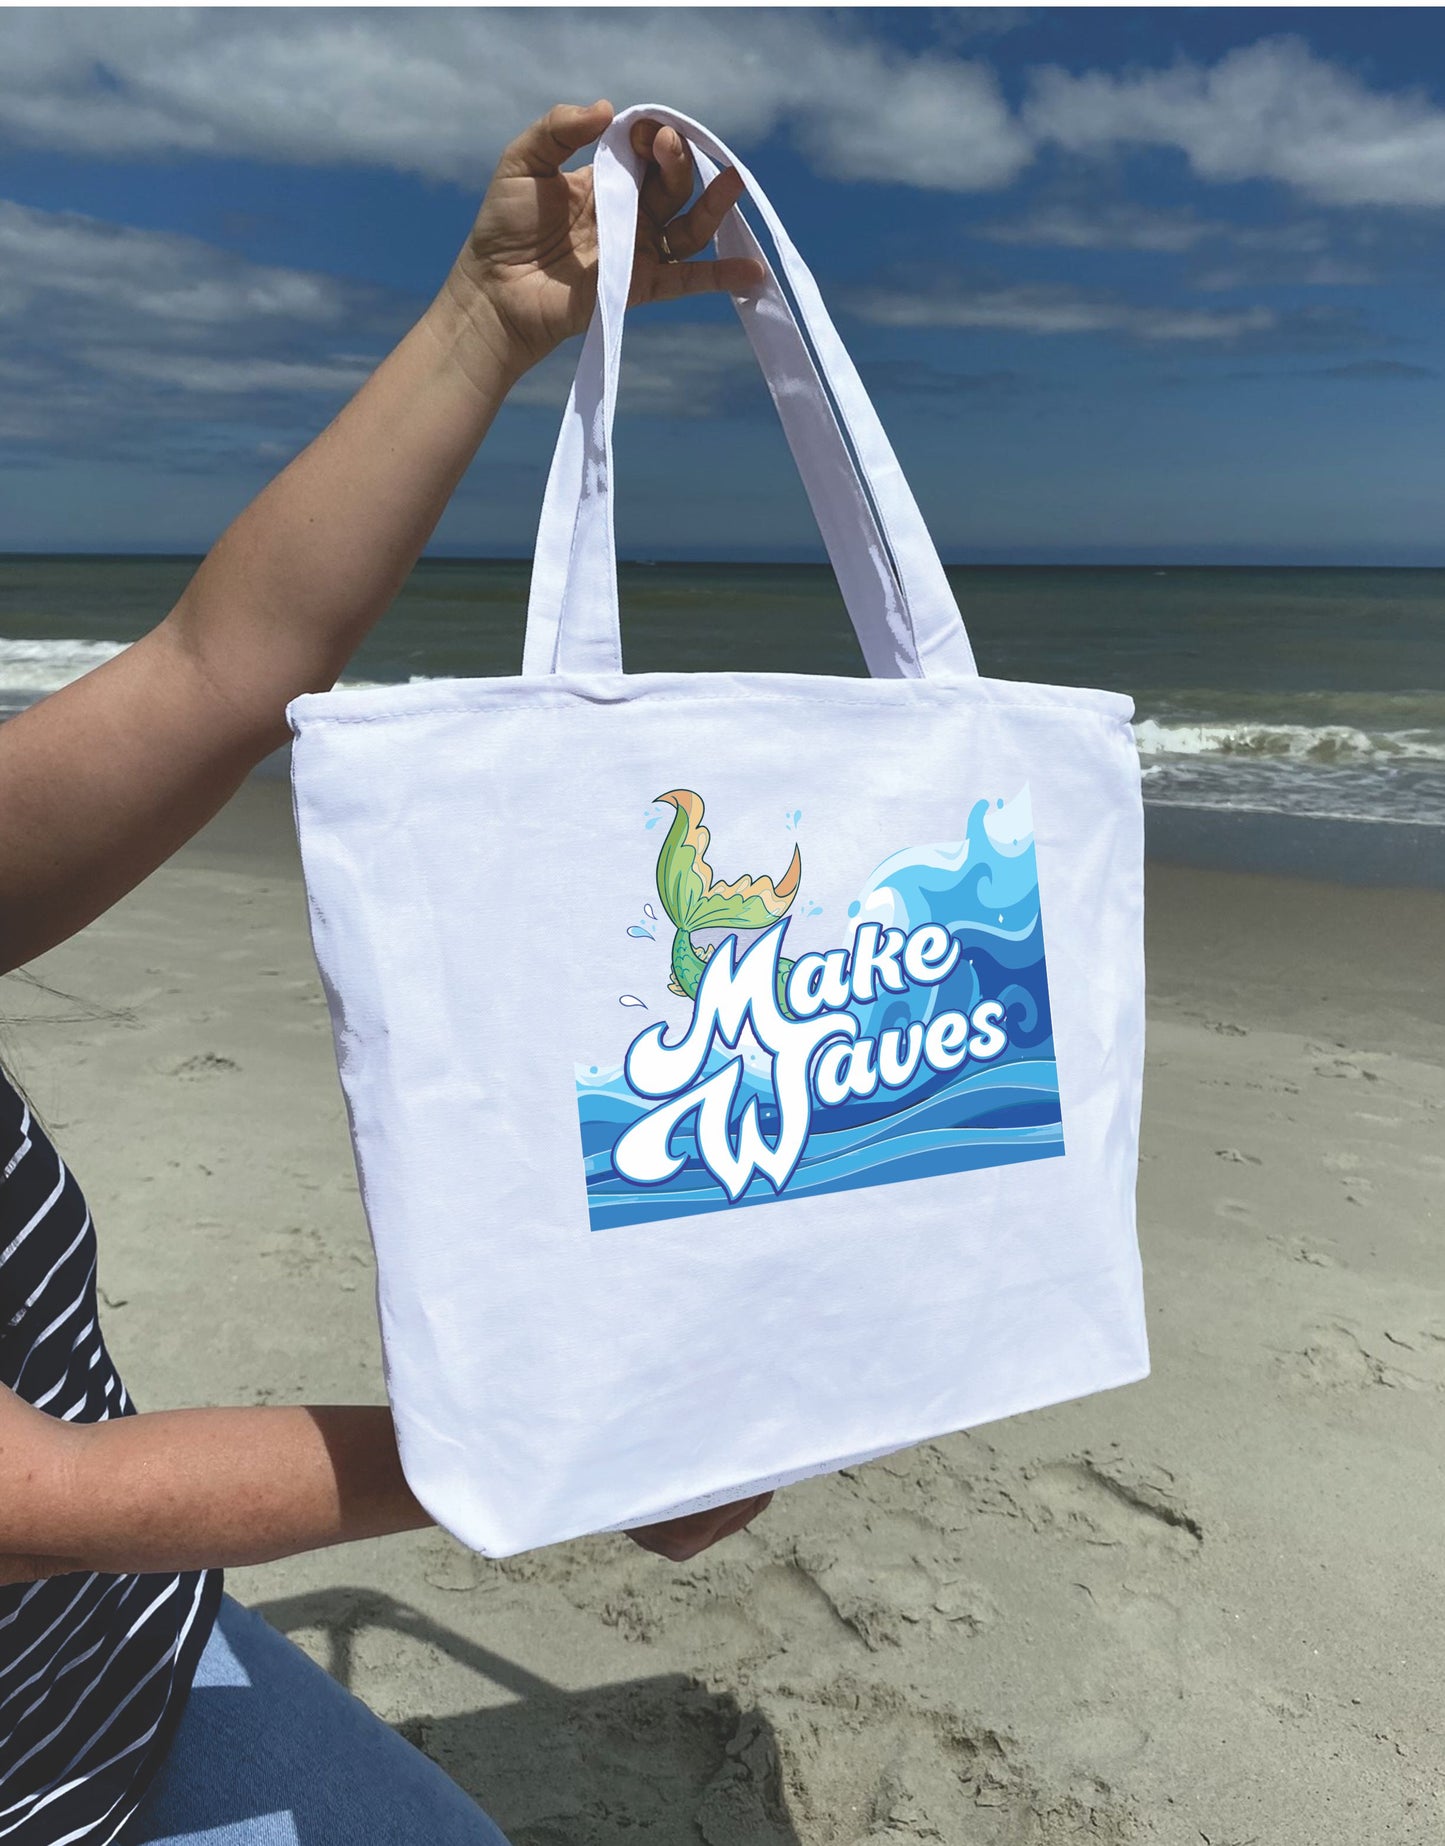 Make waves mermaid tail Heavy weight cotton canvas large zippered tote bag